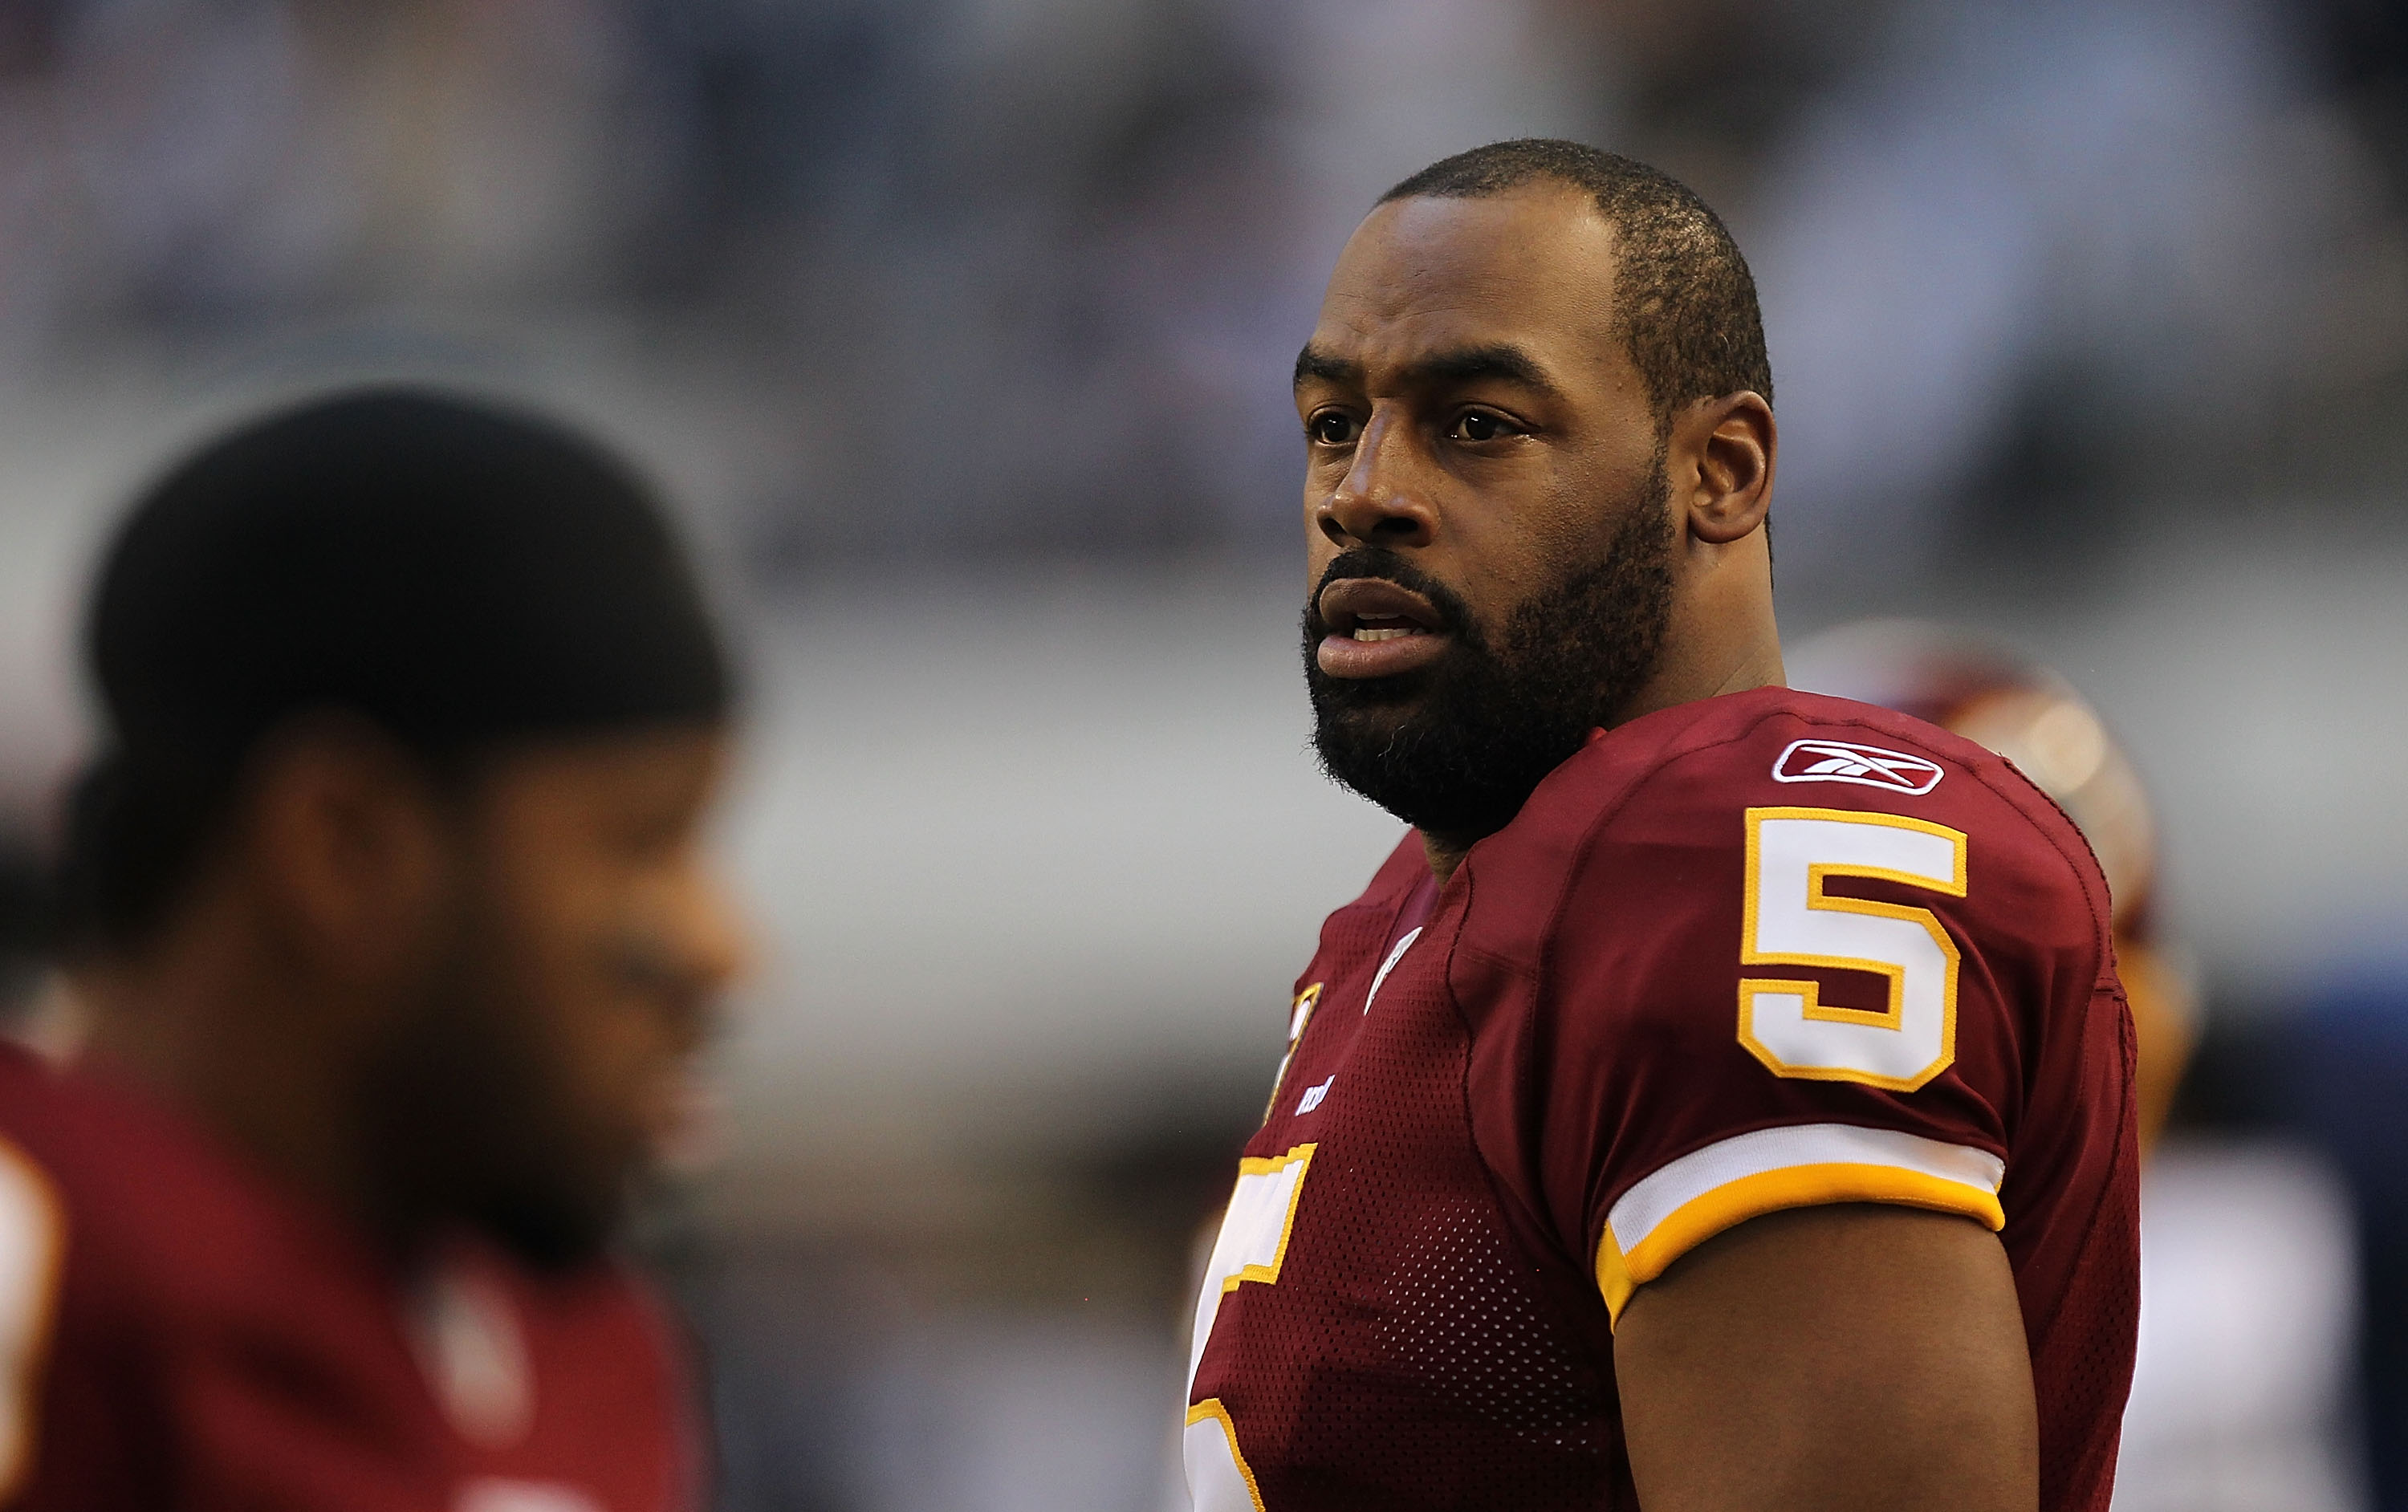 ARLINGTON, TX - DECEMBER 19:  Quarterback Donovan McNabb #5  of the Washington Redskins on the sidelines against play against the Dallas Cowboys at Cowboys Stadium on December 19, 2010 in Arlington, Texas.  (Photo by Ronald Martinez/Getty Images)